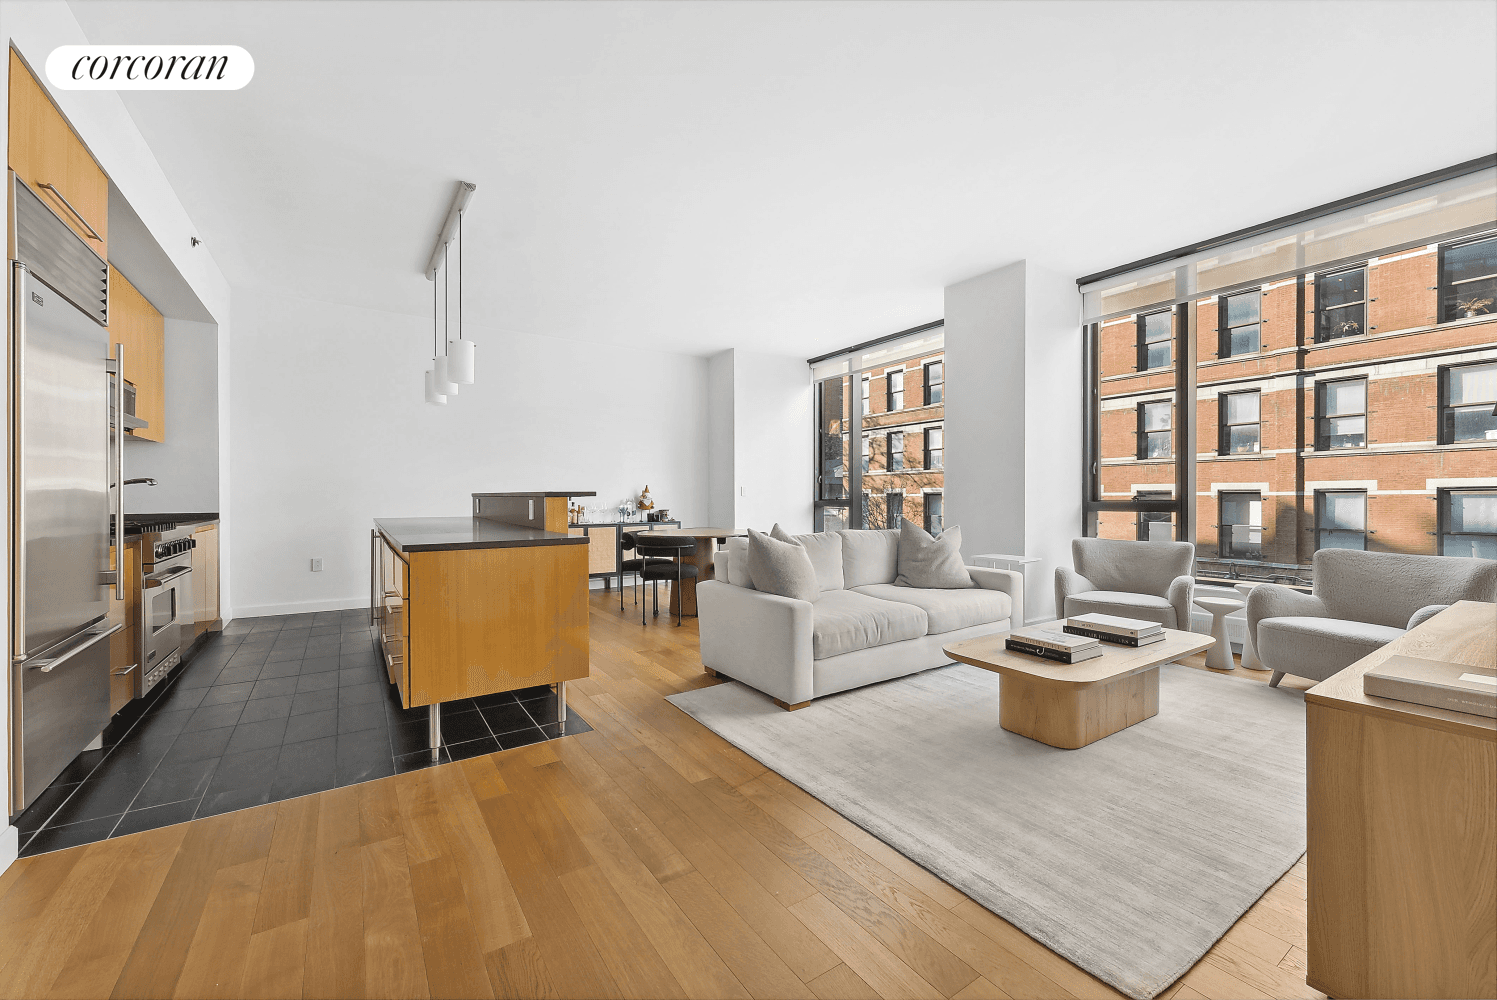 Luxurious and modern two 2 bedroom, two 2 bathroom home in the stunning 505 Greenwich Street, with floor to ceiling windows overlooking a beautiful tree lined exposure and classic New ...